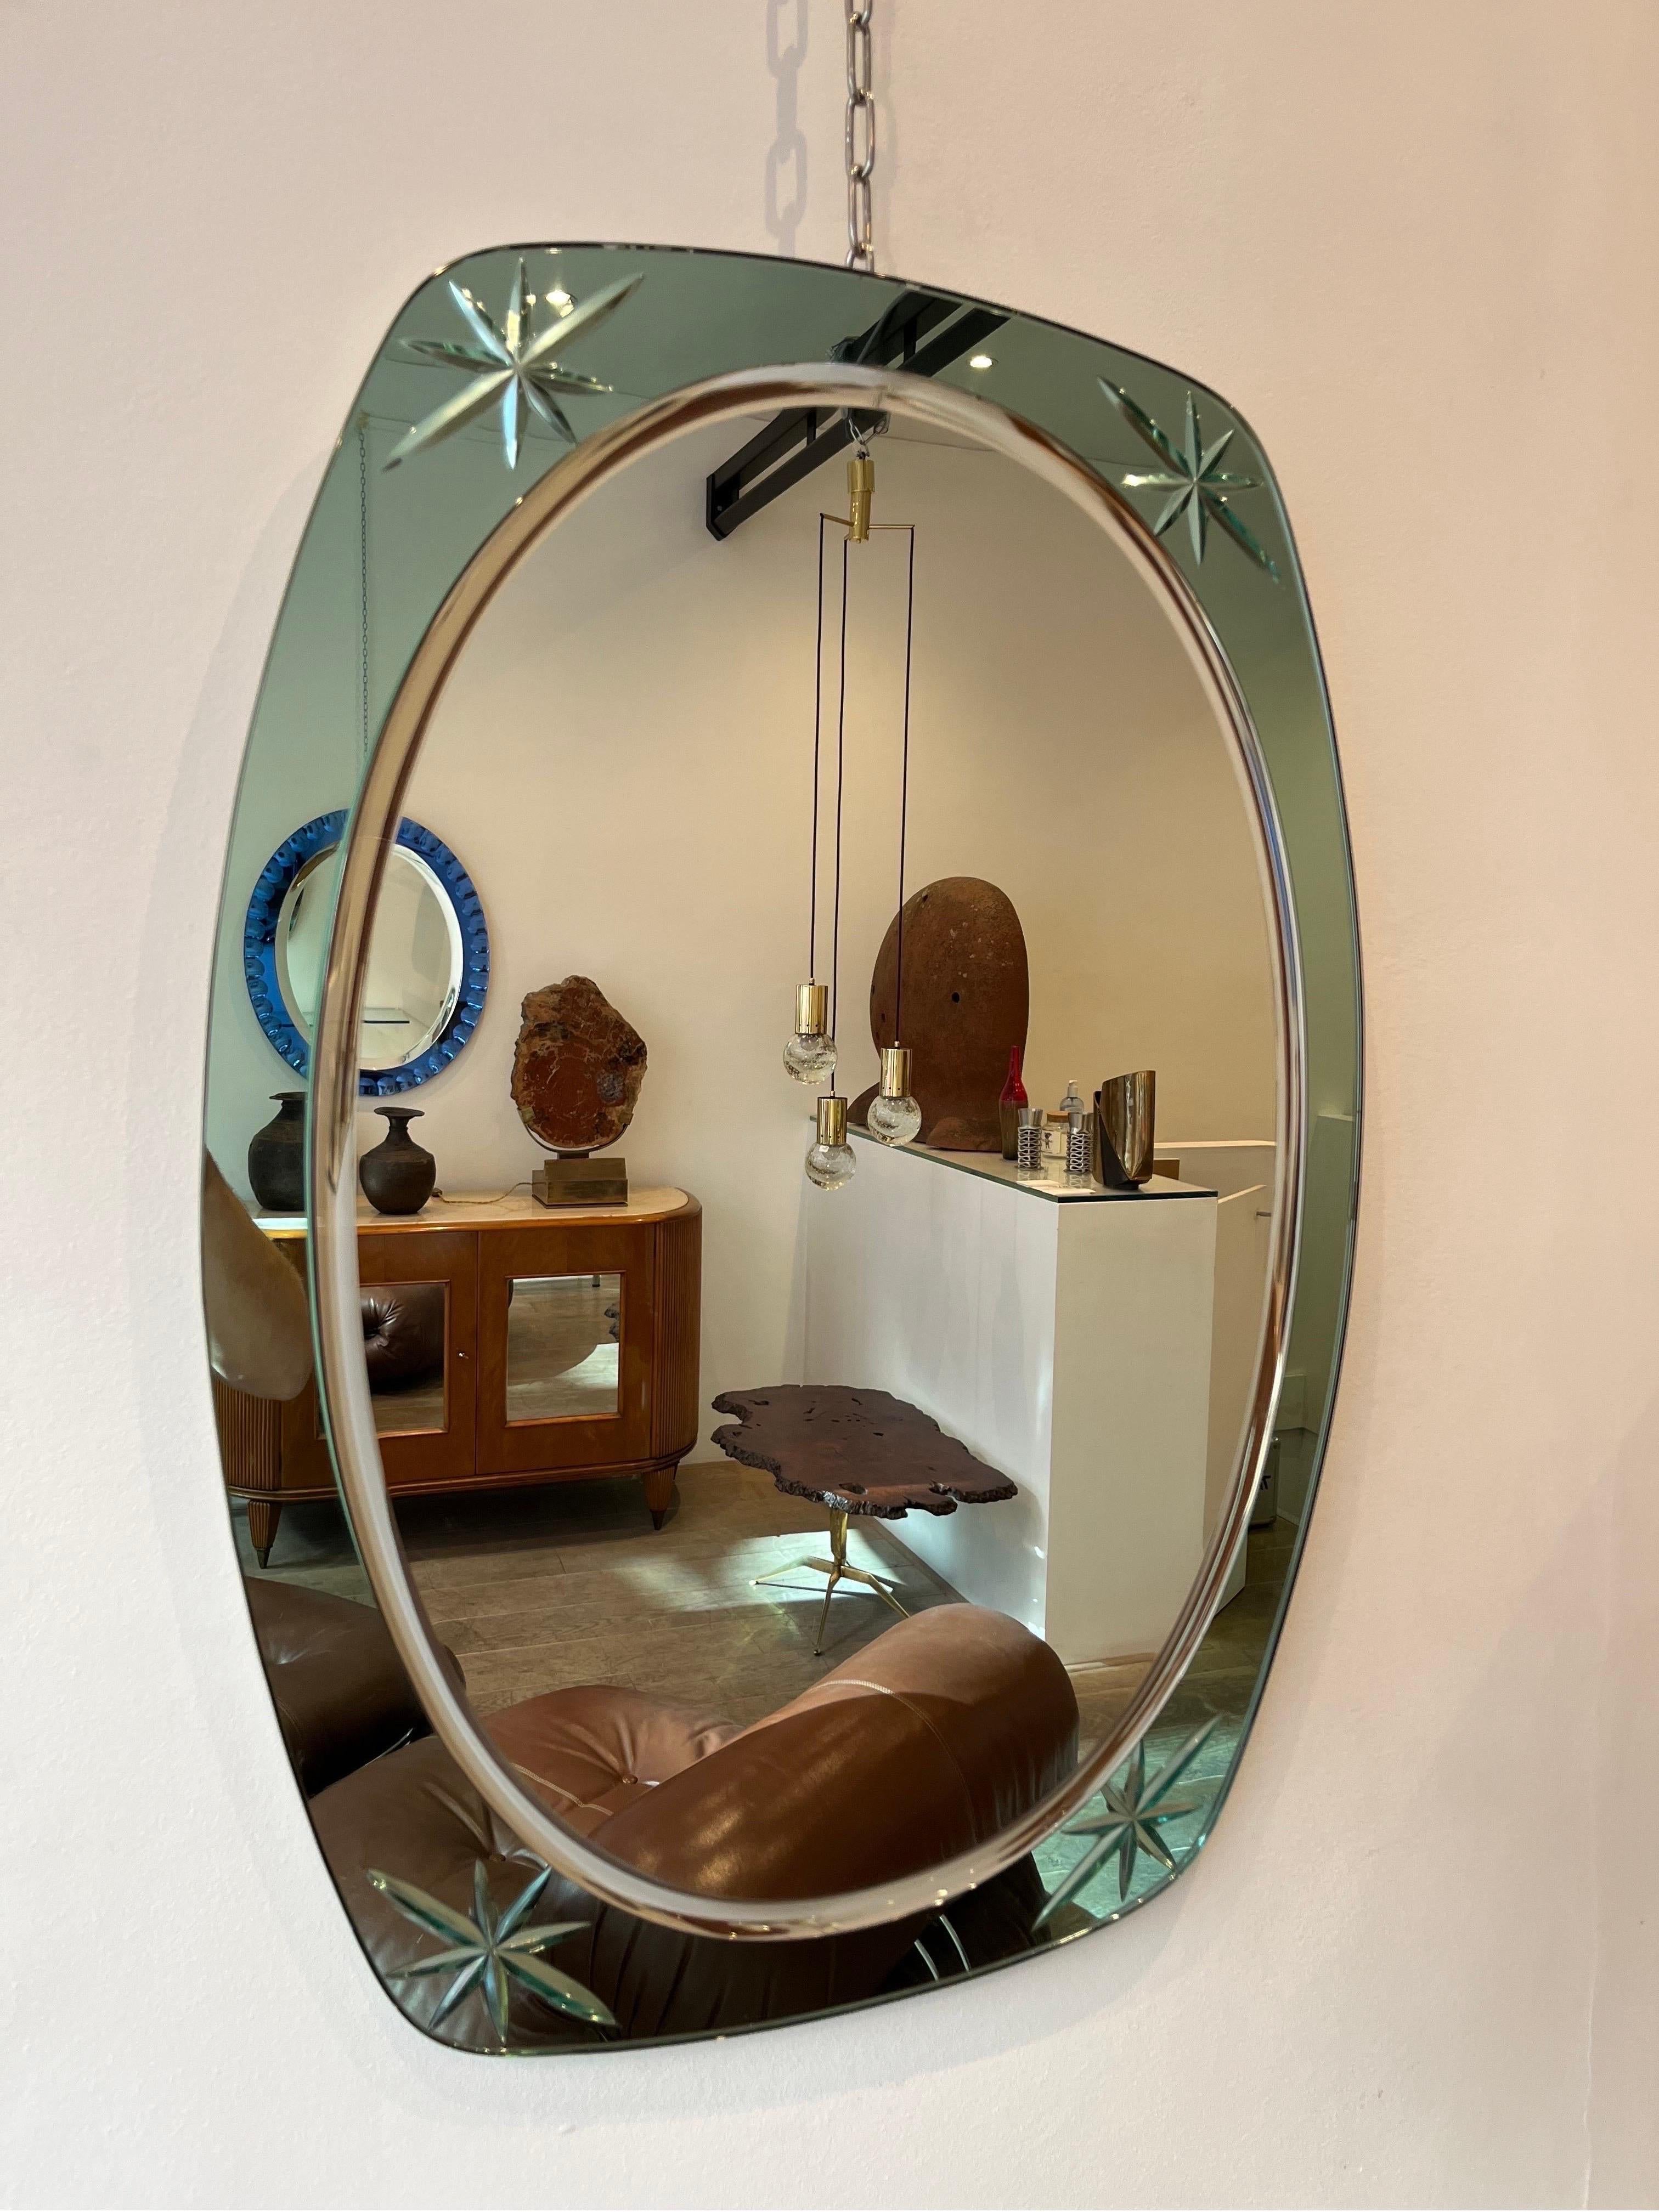 Cristal Arte is well known established decorative glass manufacturer from Torino in Italy. It reached its fame in the 1950s when the production of decorative mirrors was highly creative with innovative designs. The present mirror is water green